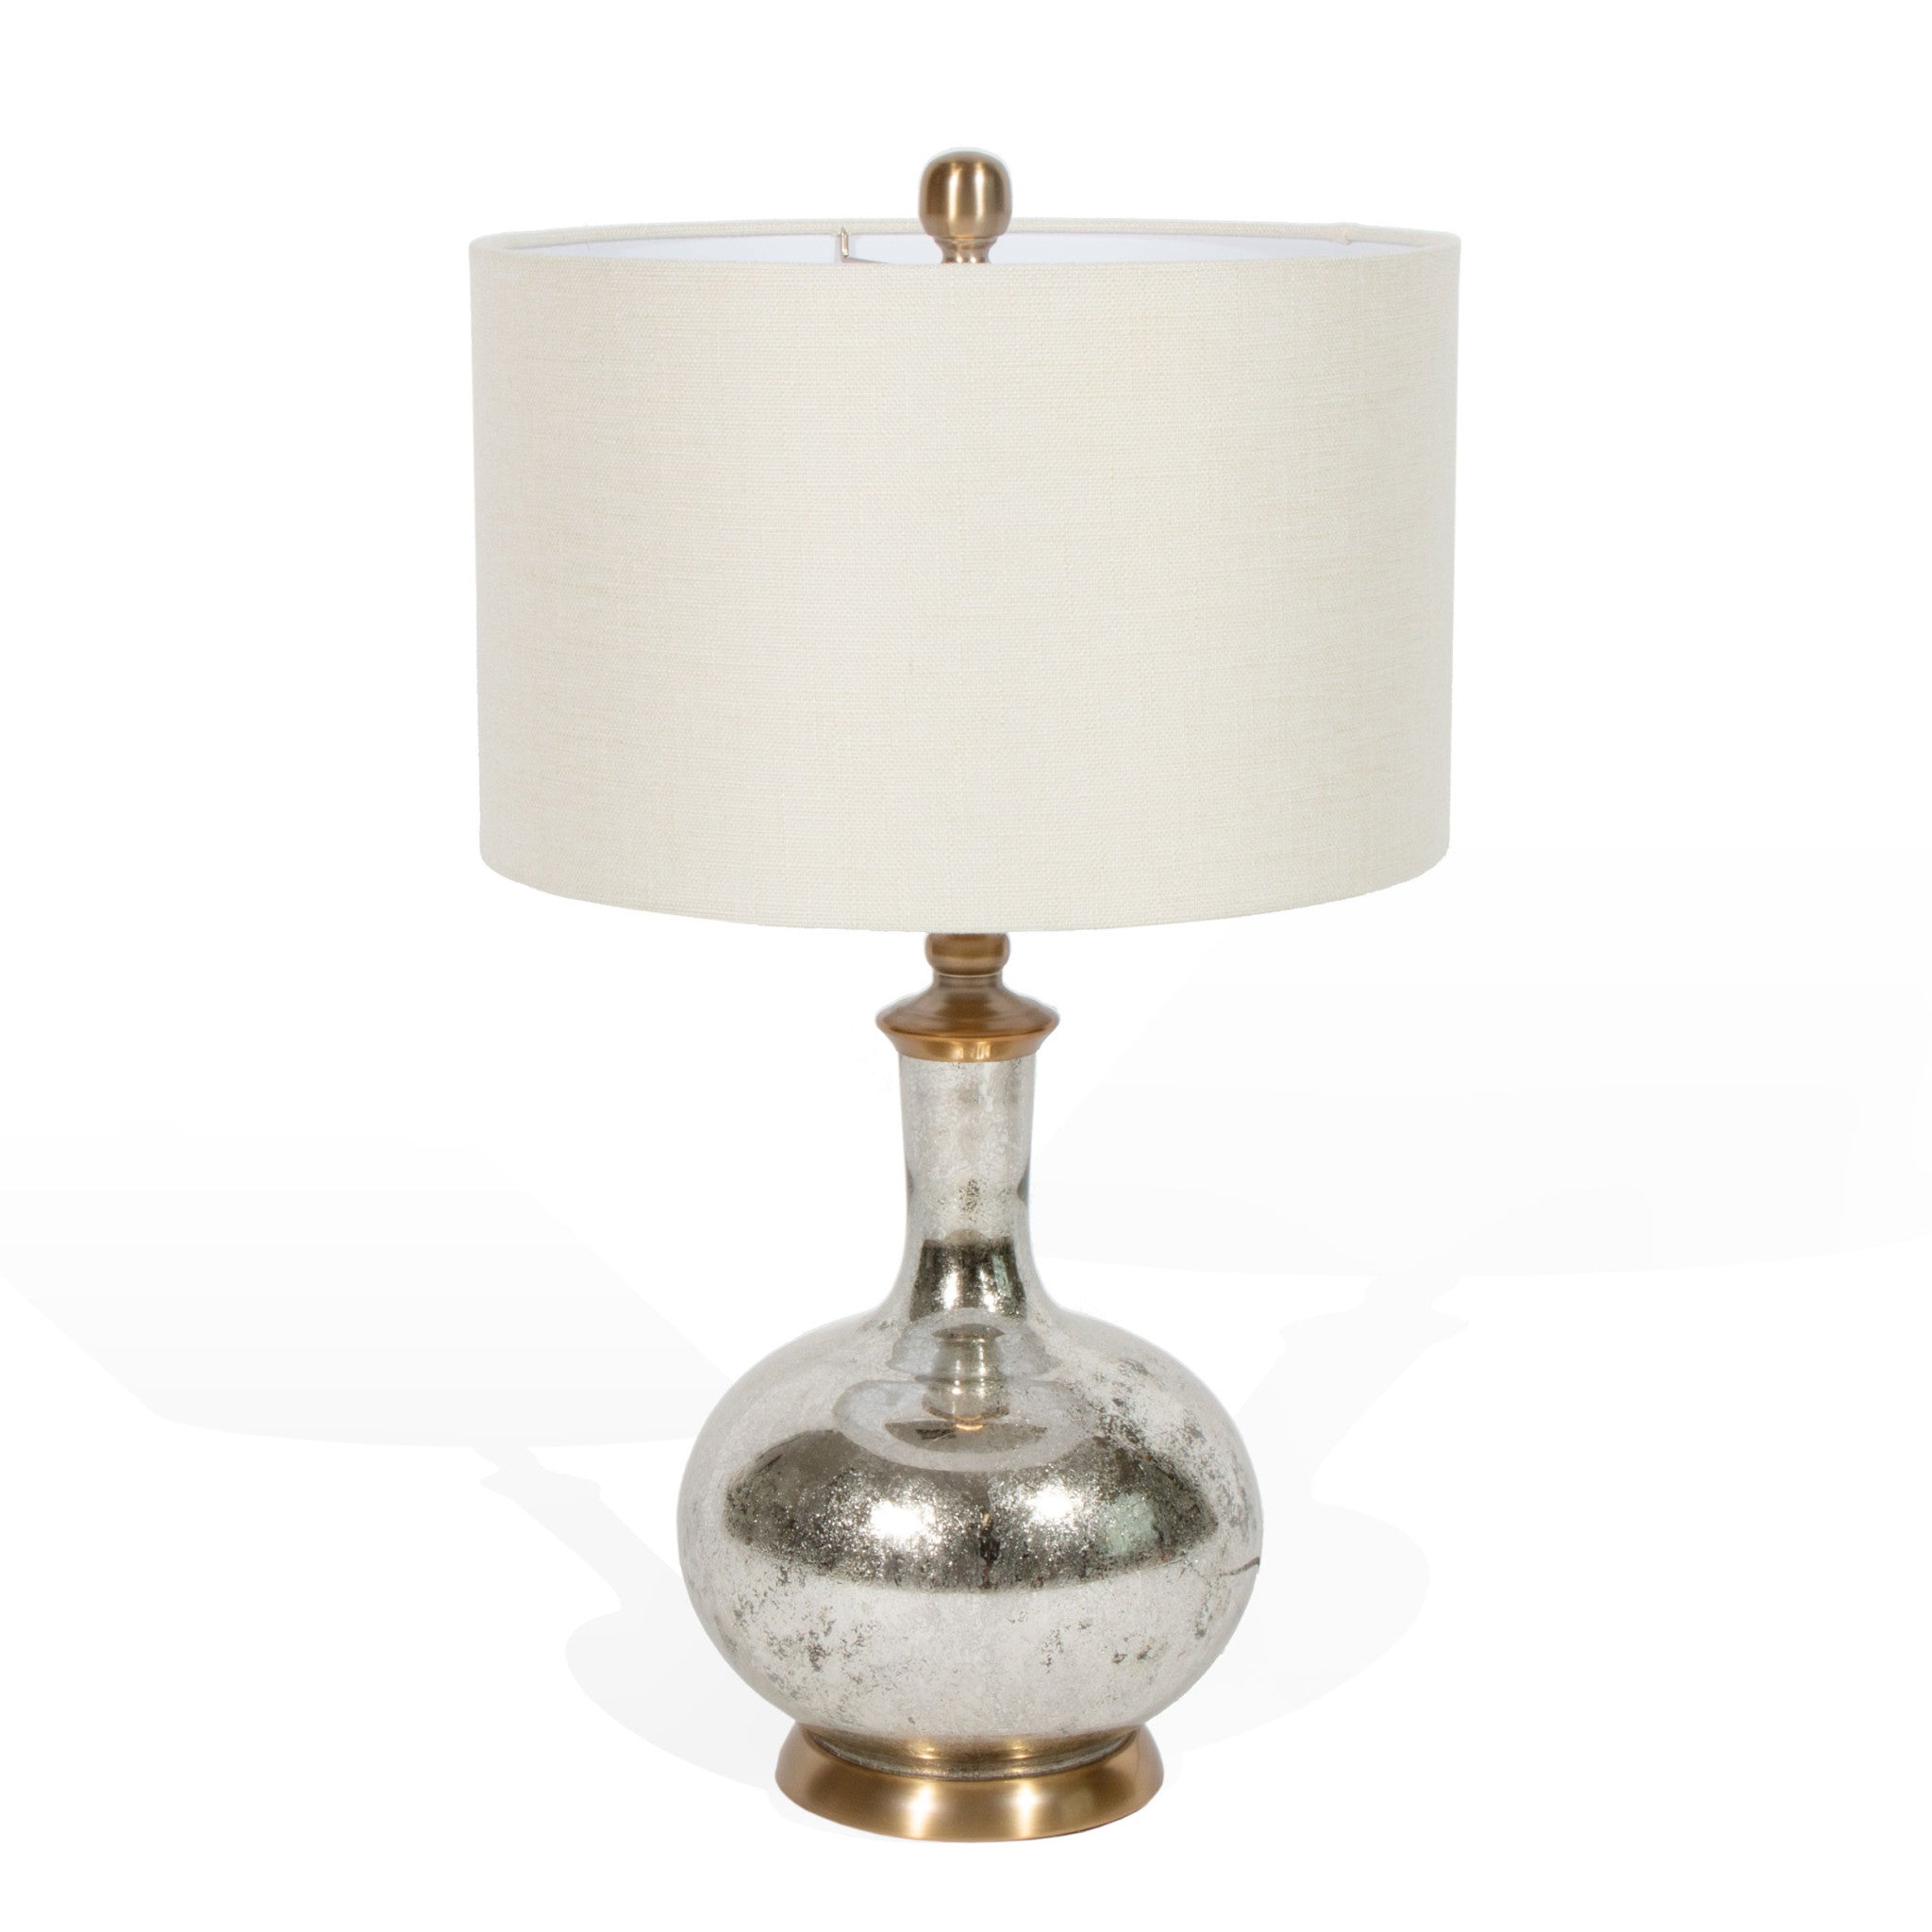 27" Silver Metallic Glass LED Table Lamp With Ivory Drum Shade